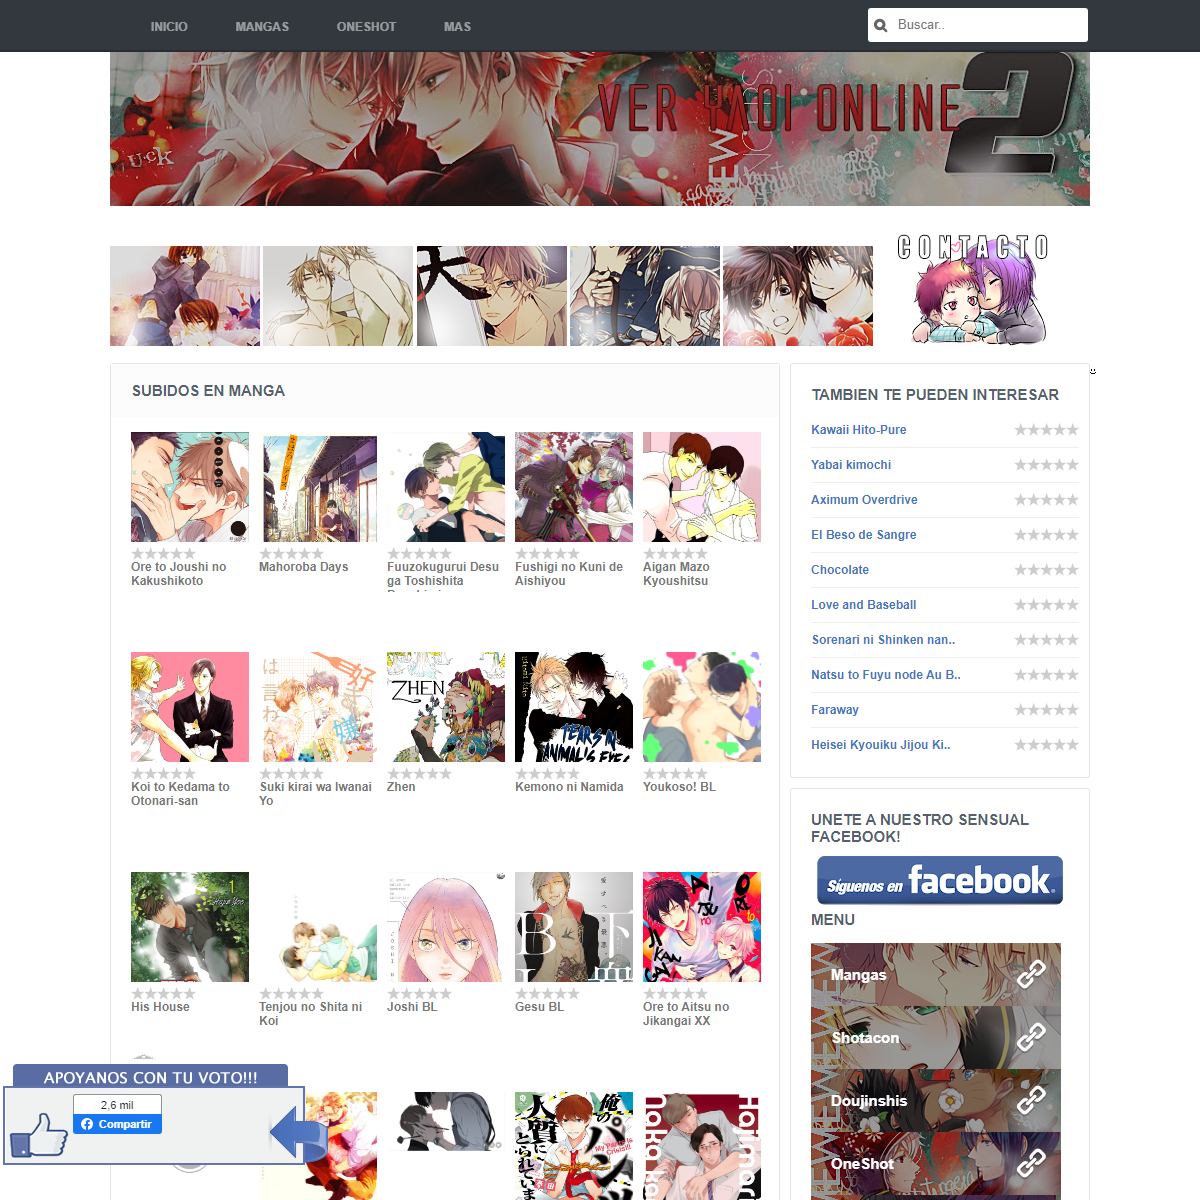 A complete backup of http://veryaoionline.net/categoria/manga/page/3